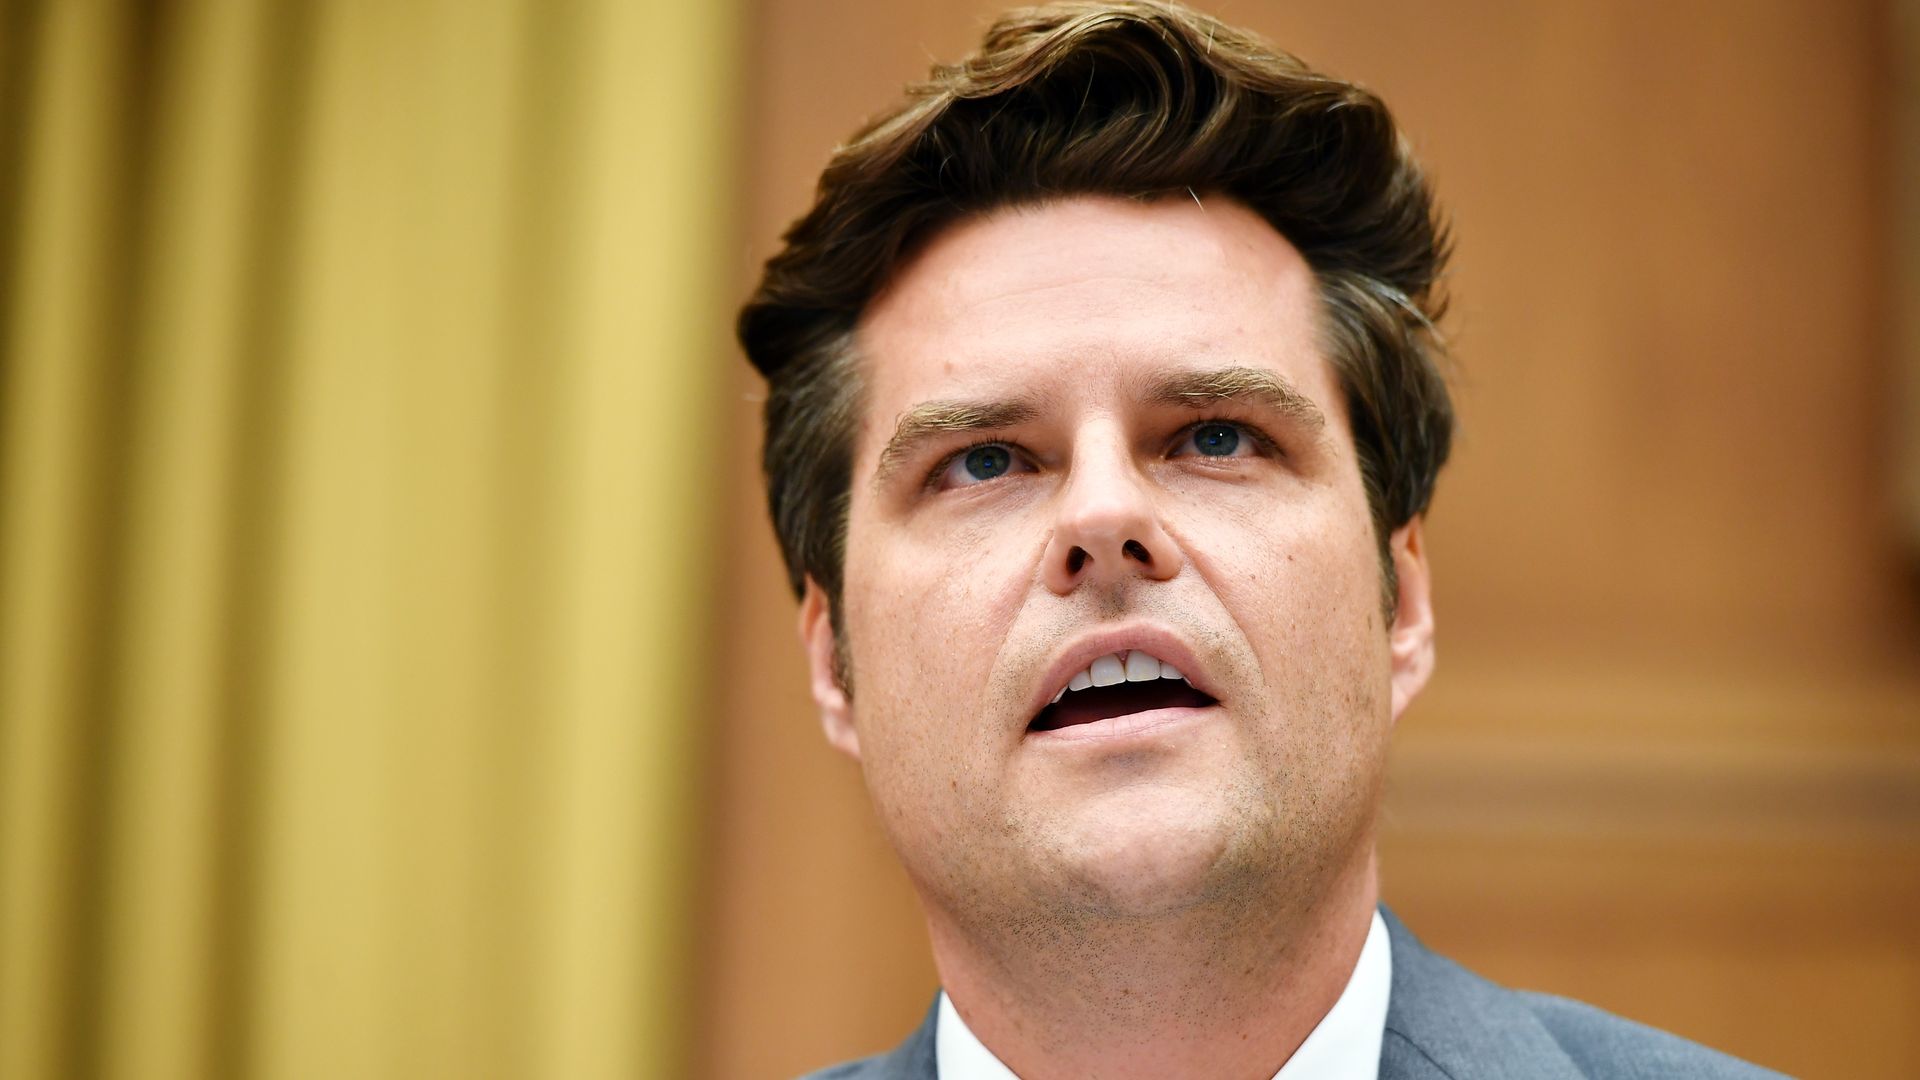 Rep. Matt Gaetz, R-FL, speaks during a House Judiciary subcommittee hearing on Online Platforms and Market Power in the Rayburn House office Building, July 29, 2020 on Capitol Hill in Washington, DC.